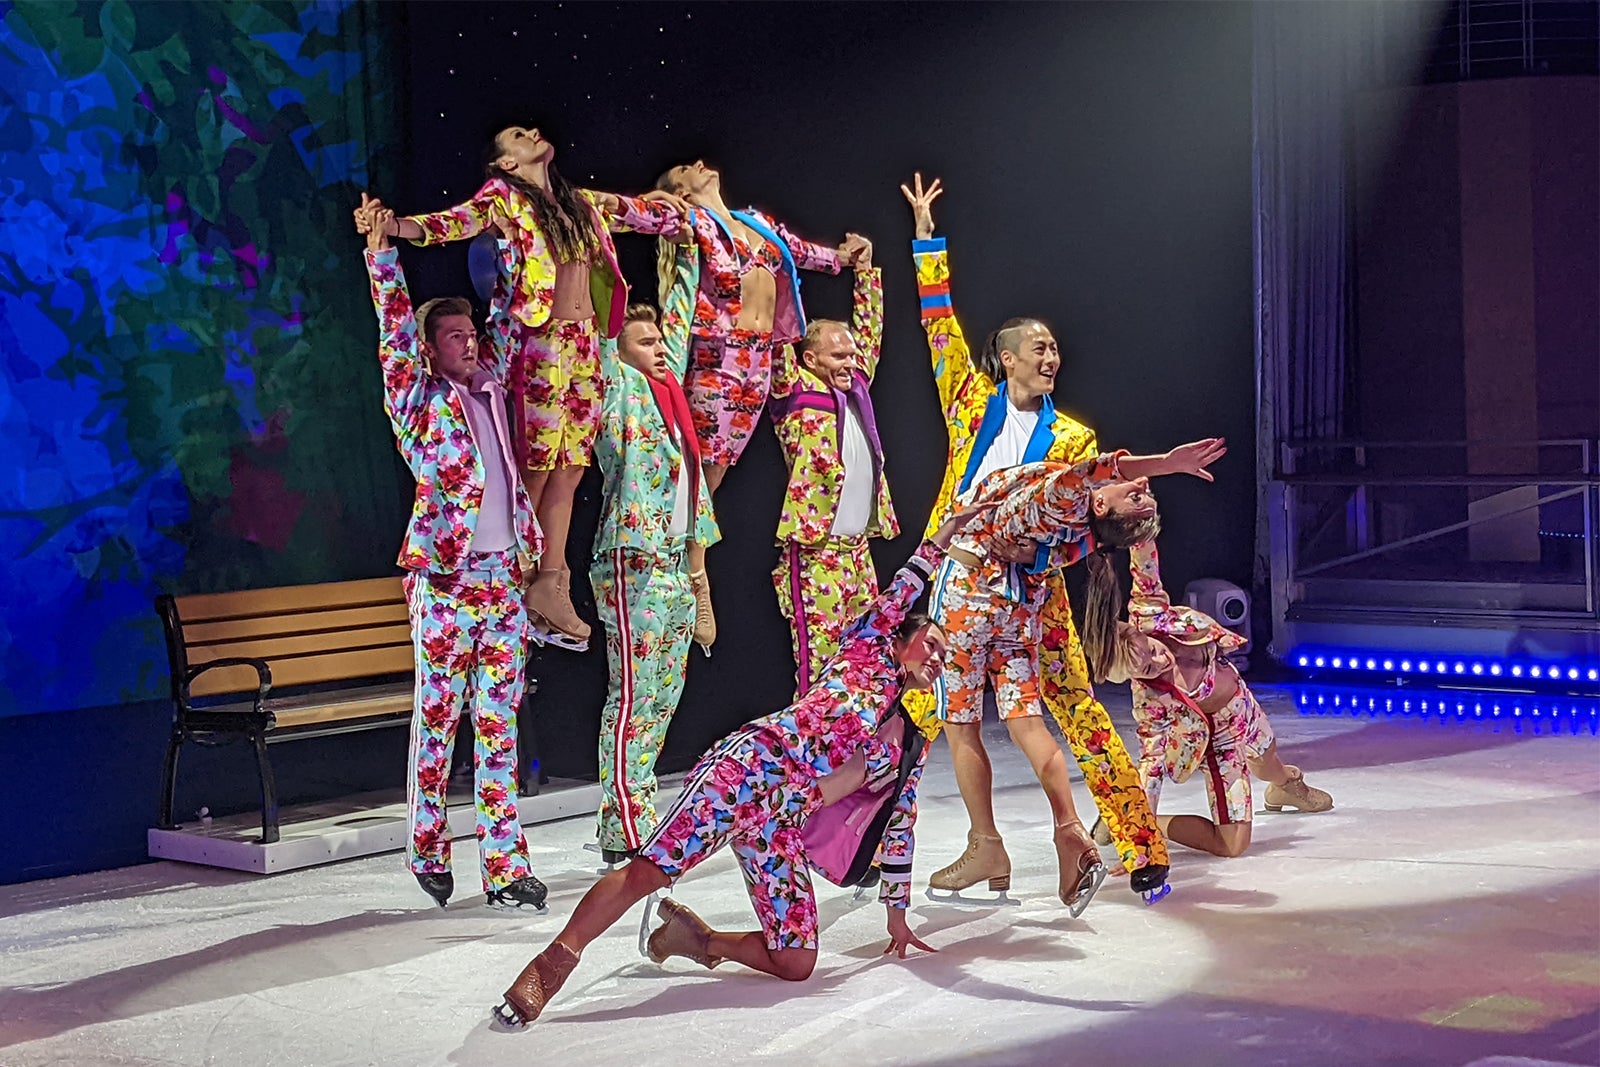 Ice skaters pose in colorful floral costumes